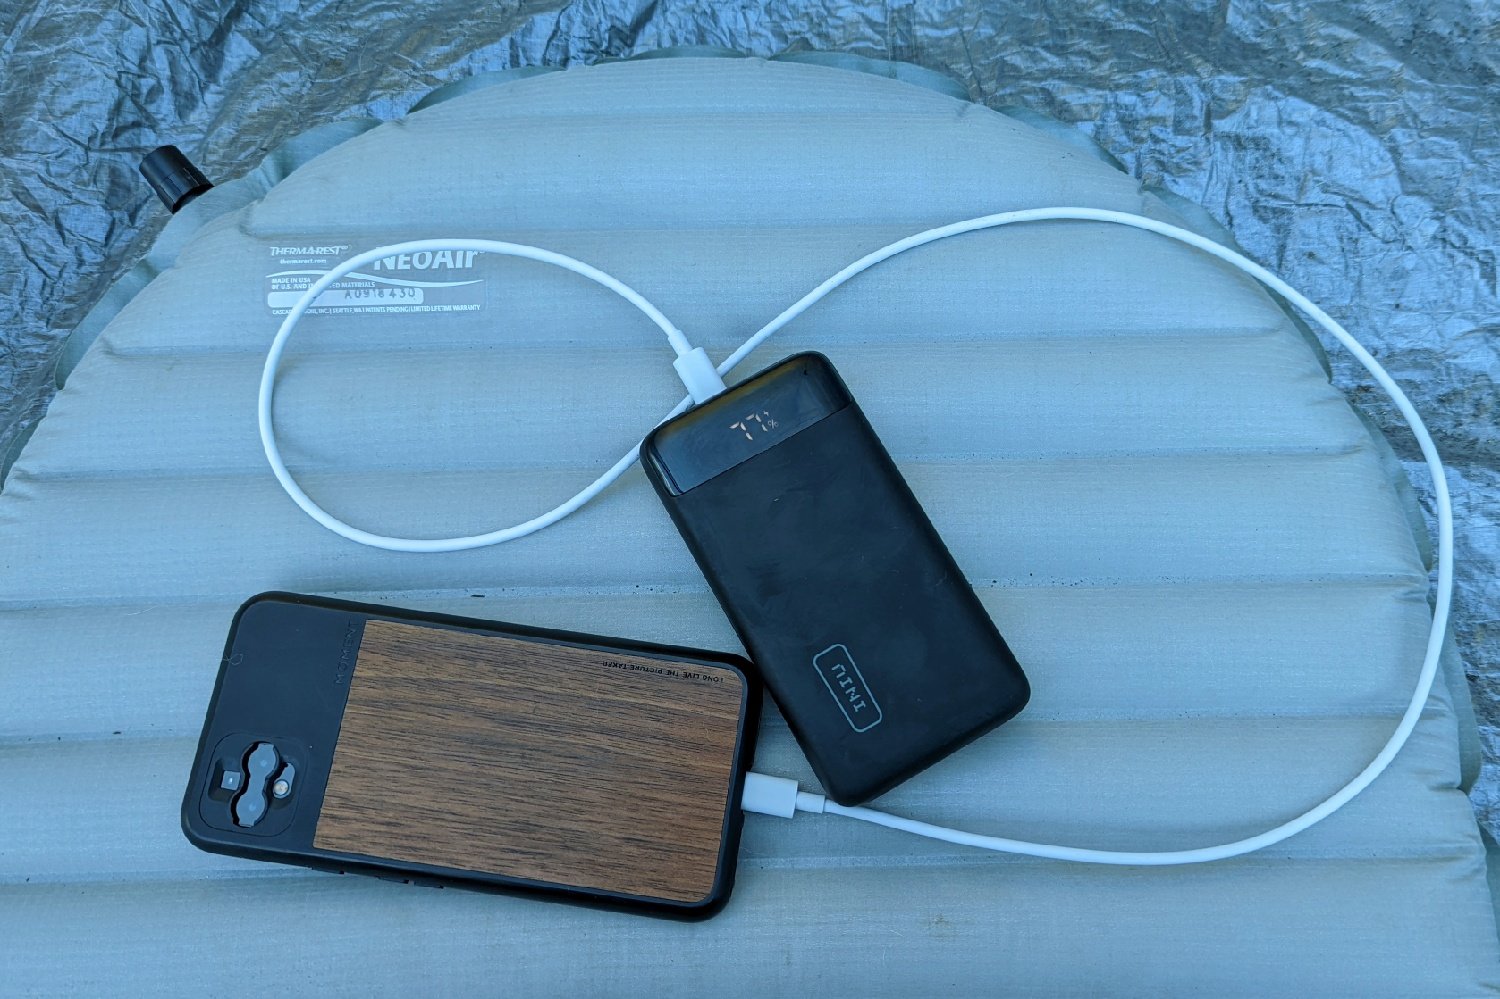 The Iniu 20000 PD power bank being used for camping